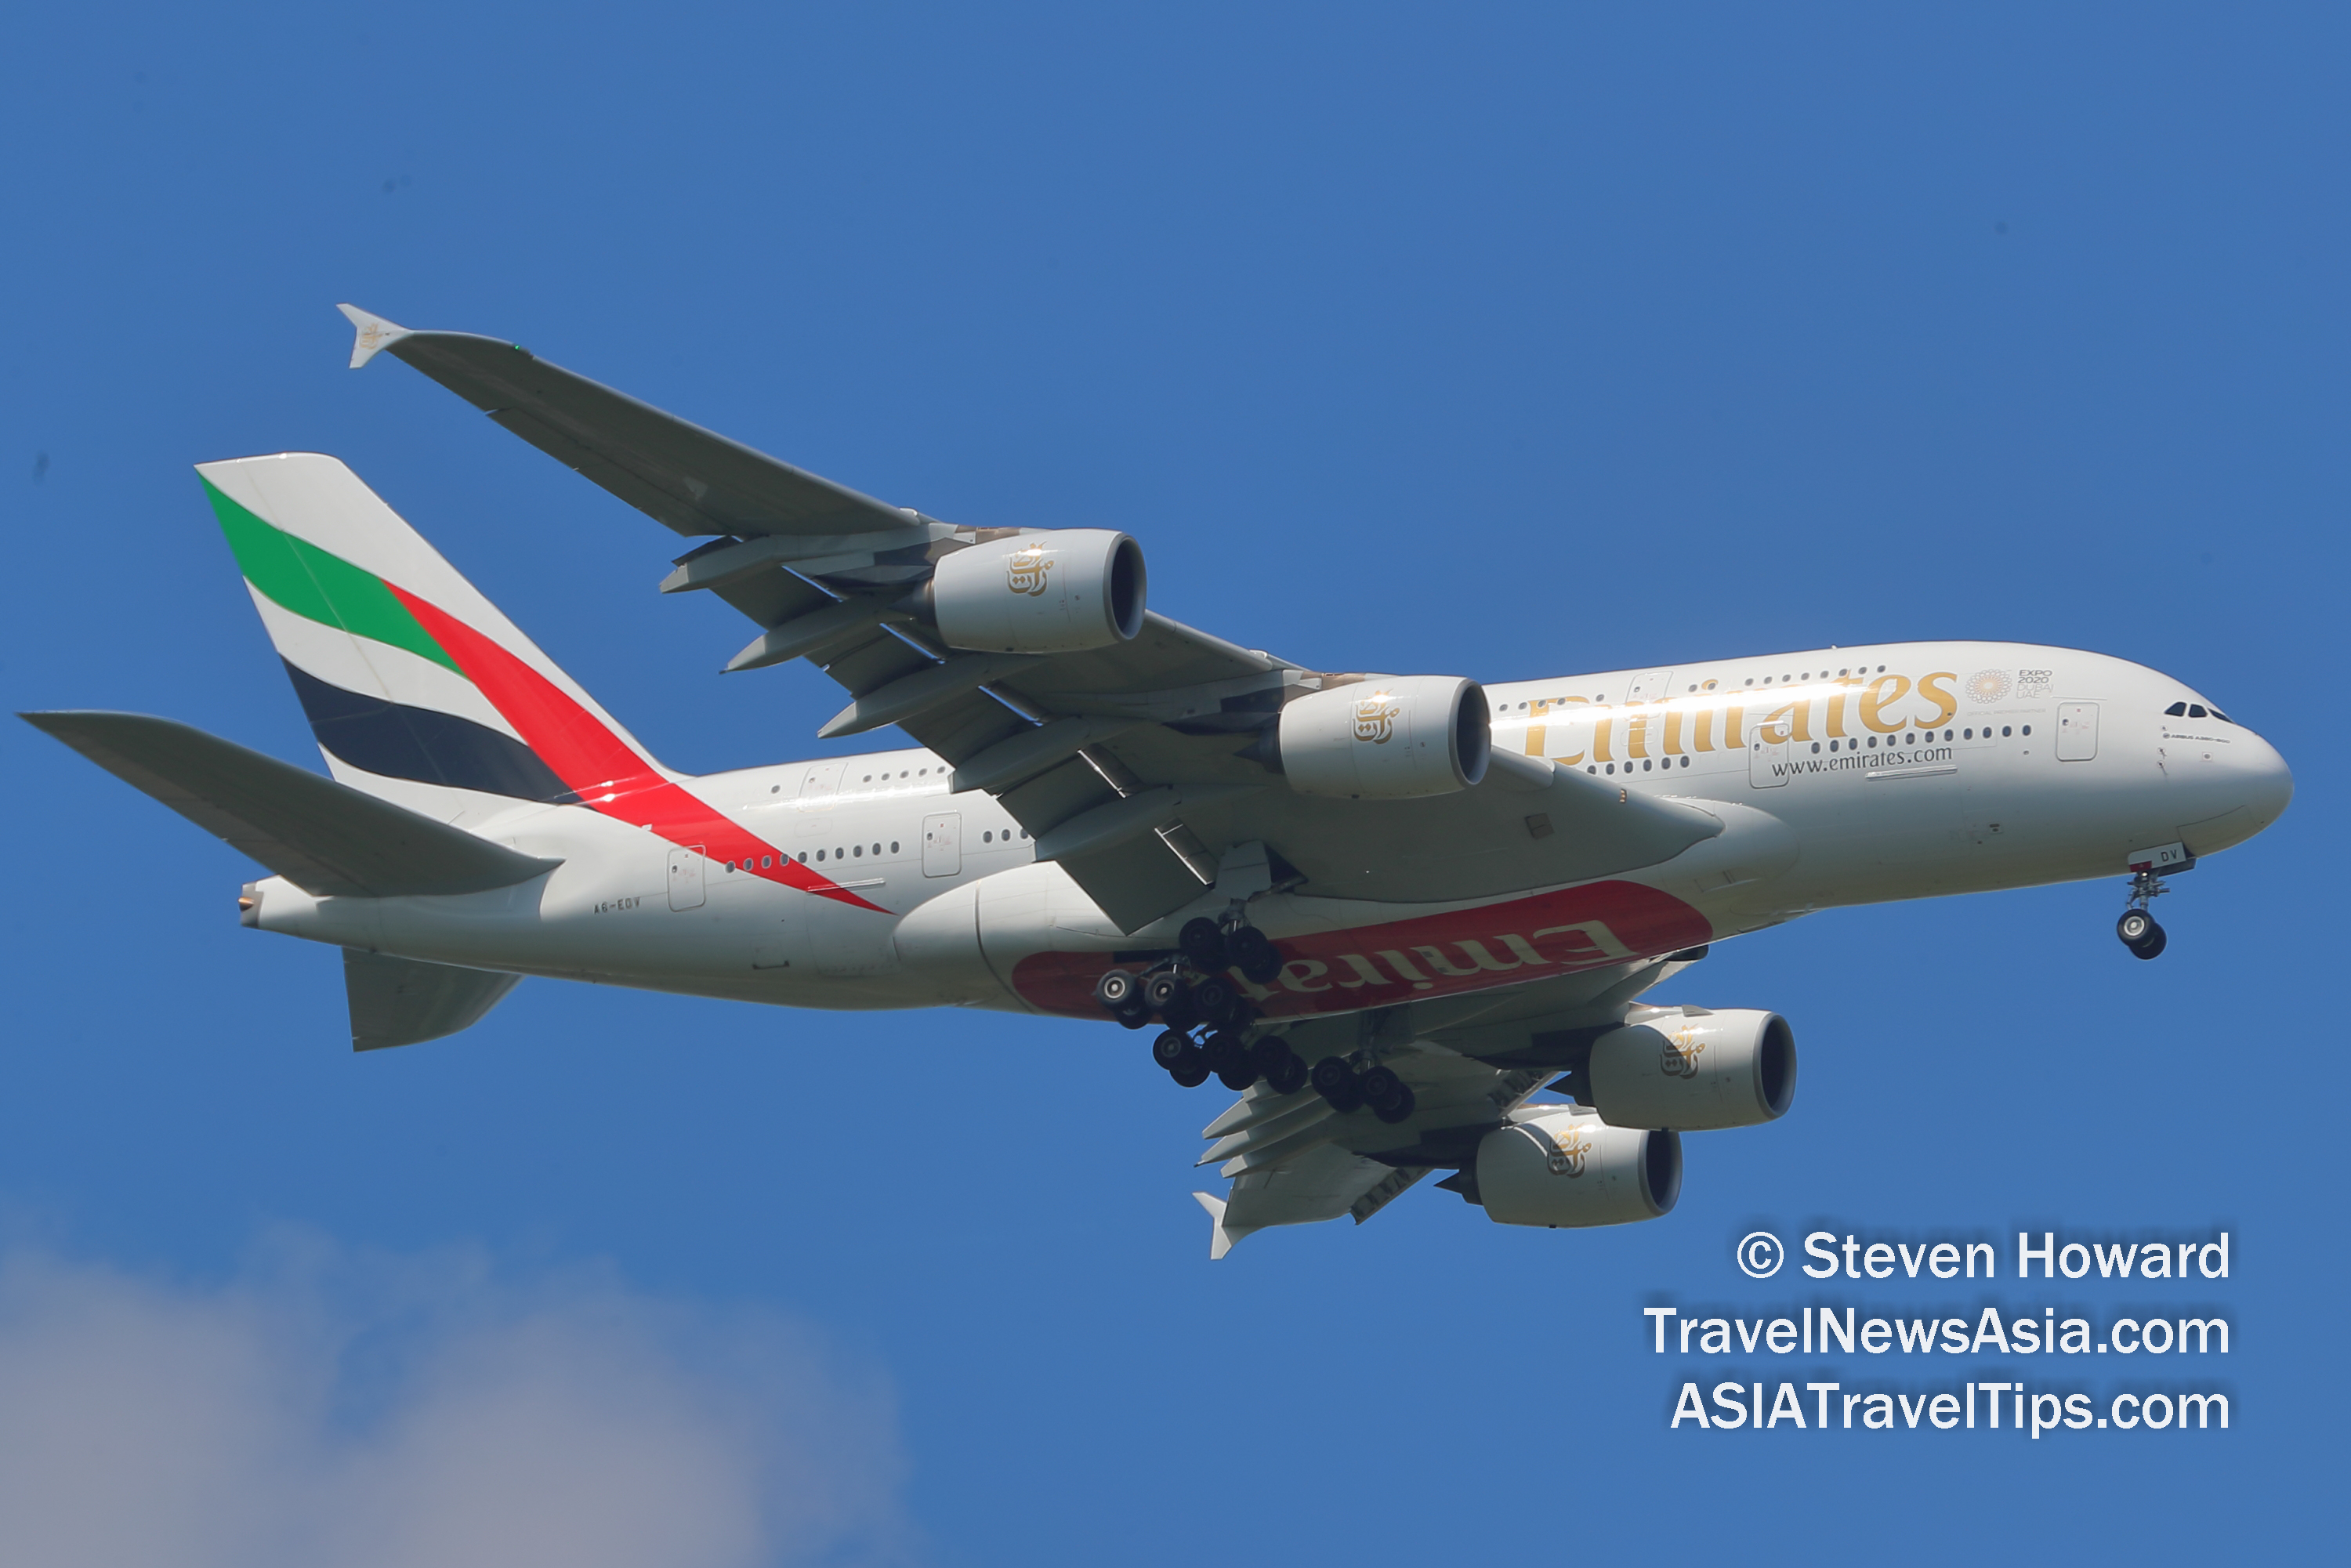 Emirates Airbus A380 reg: A6-EDV. Picture by Steven Howard of TravelNewsAsia.com on 3 July 2019 Click to enlarge.